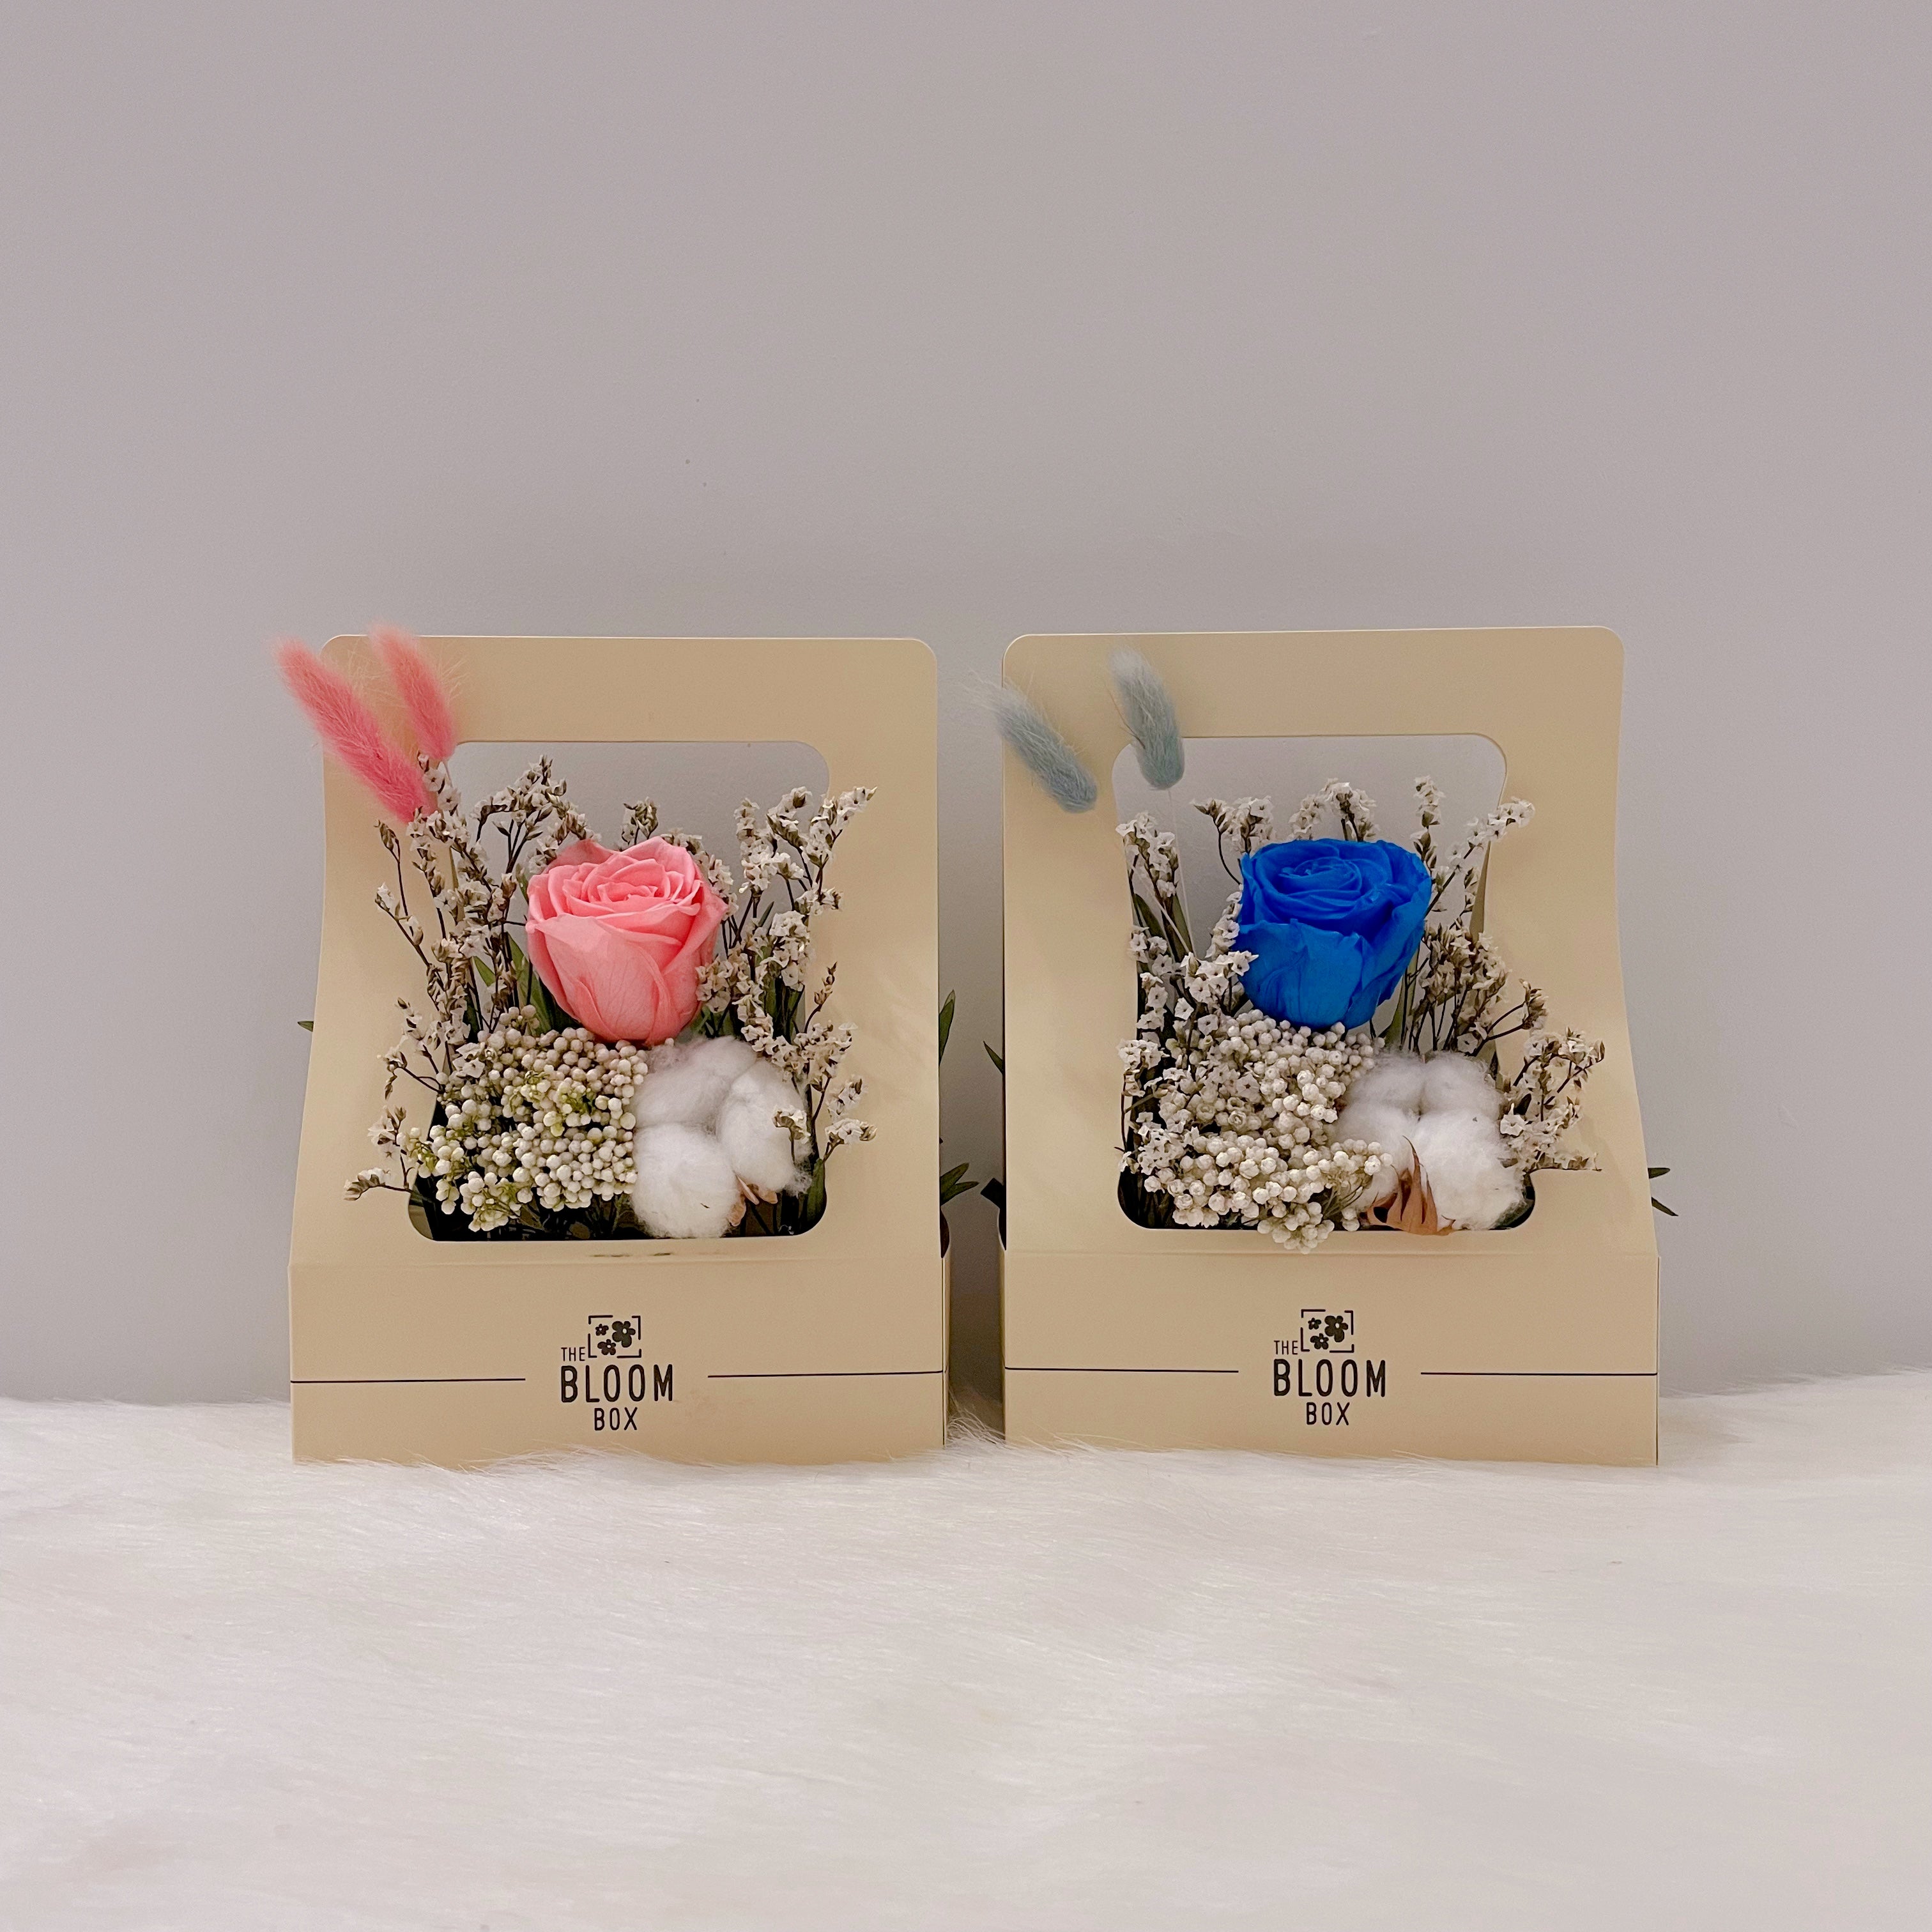 2 mini bloom boxes with pink and blue roses